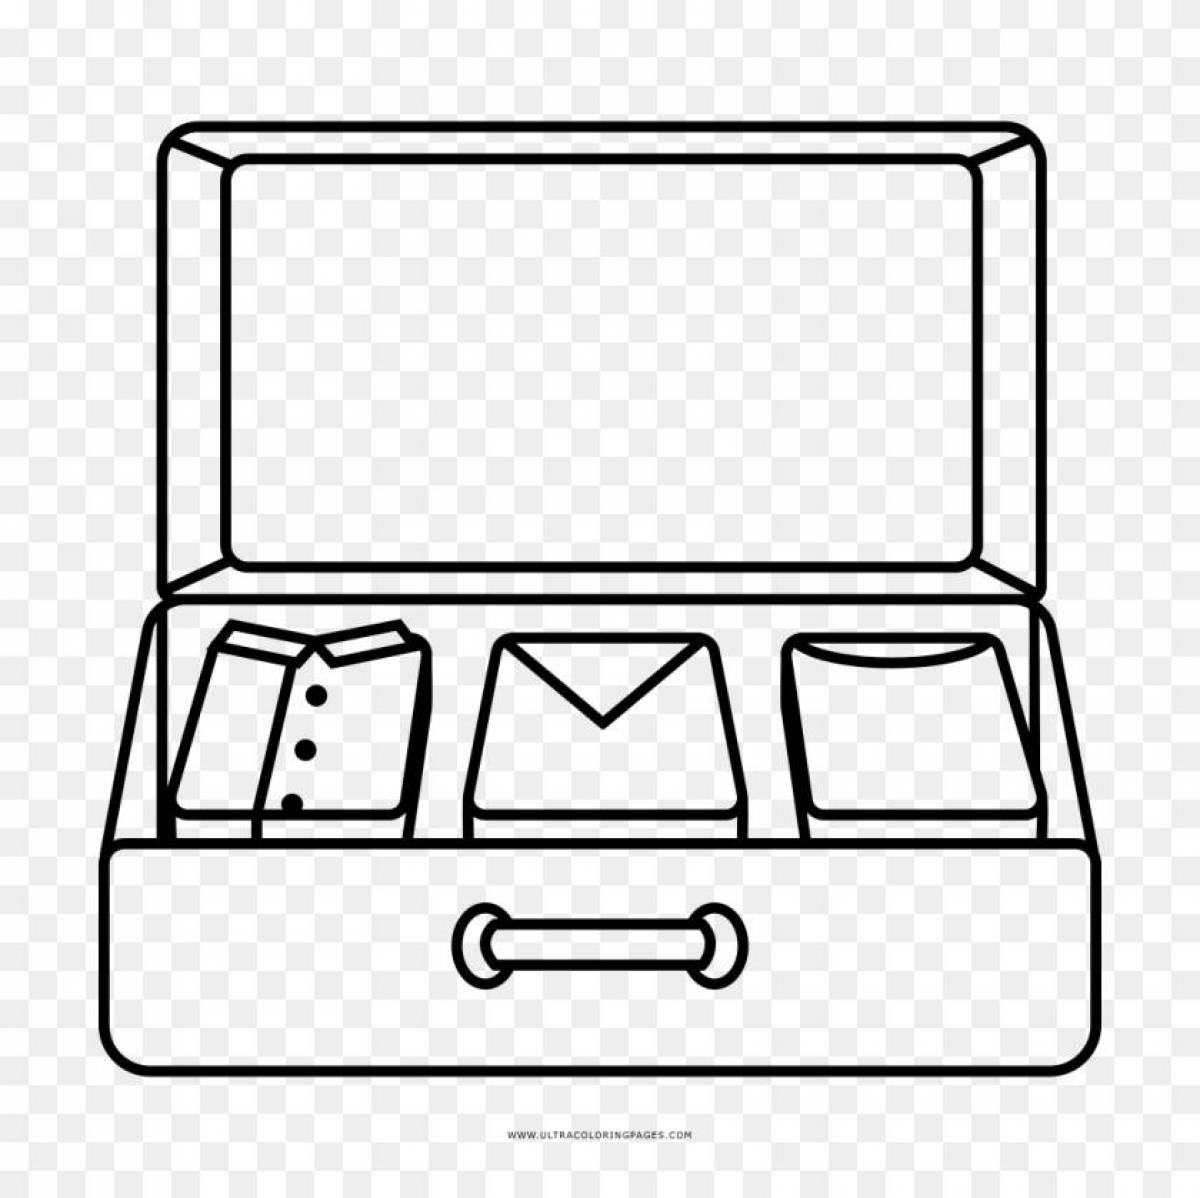 Coloring for the majestic suitcase